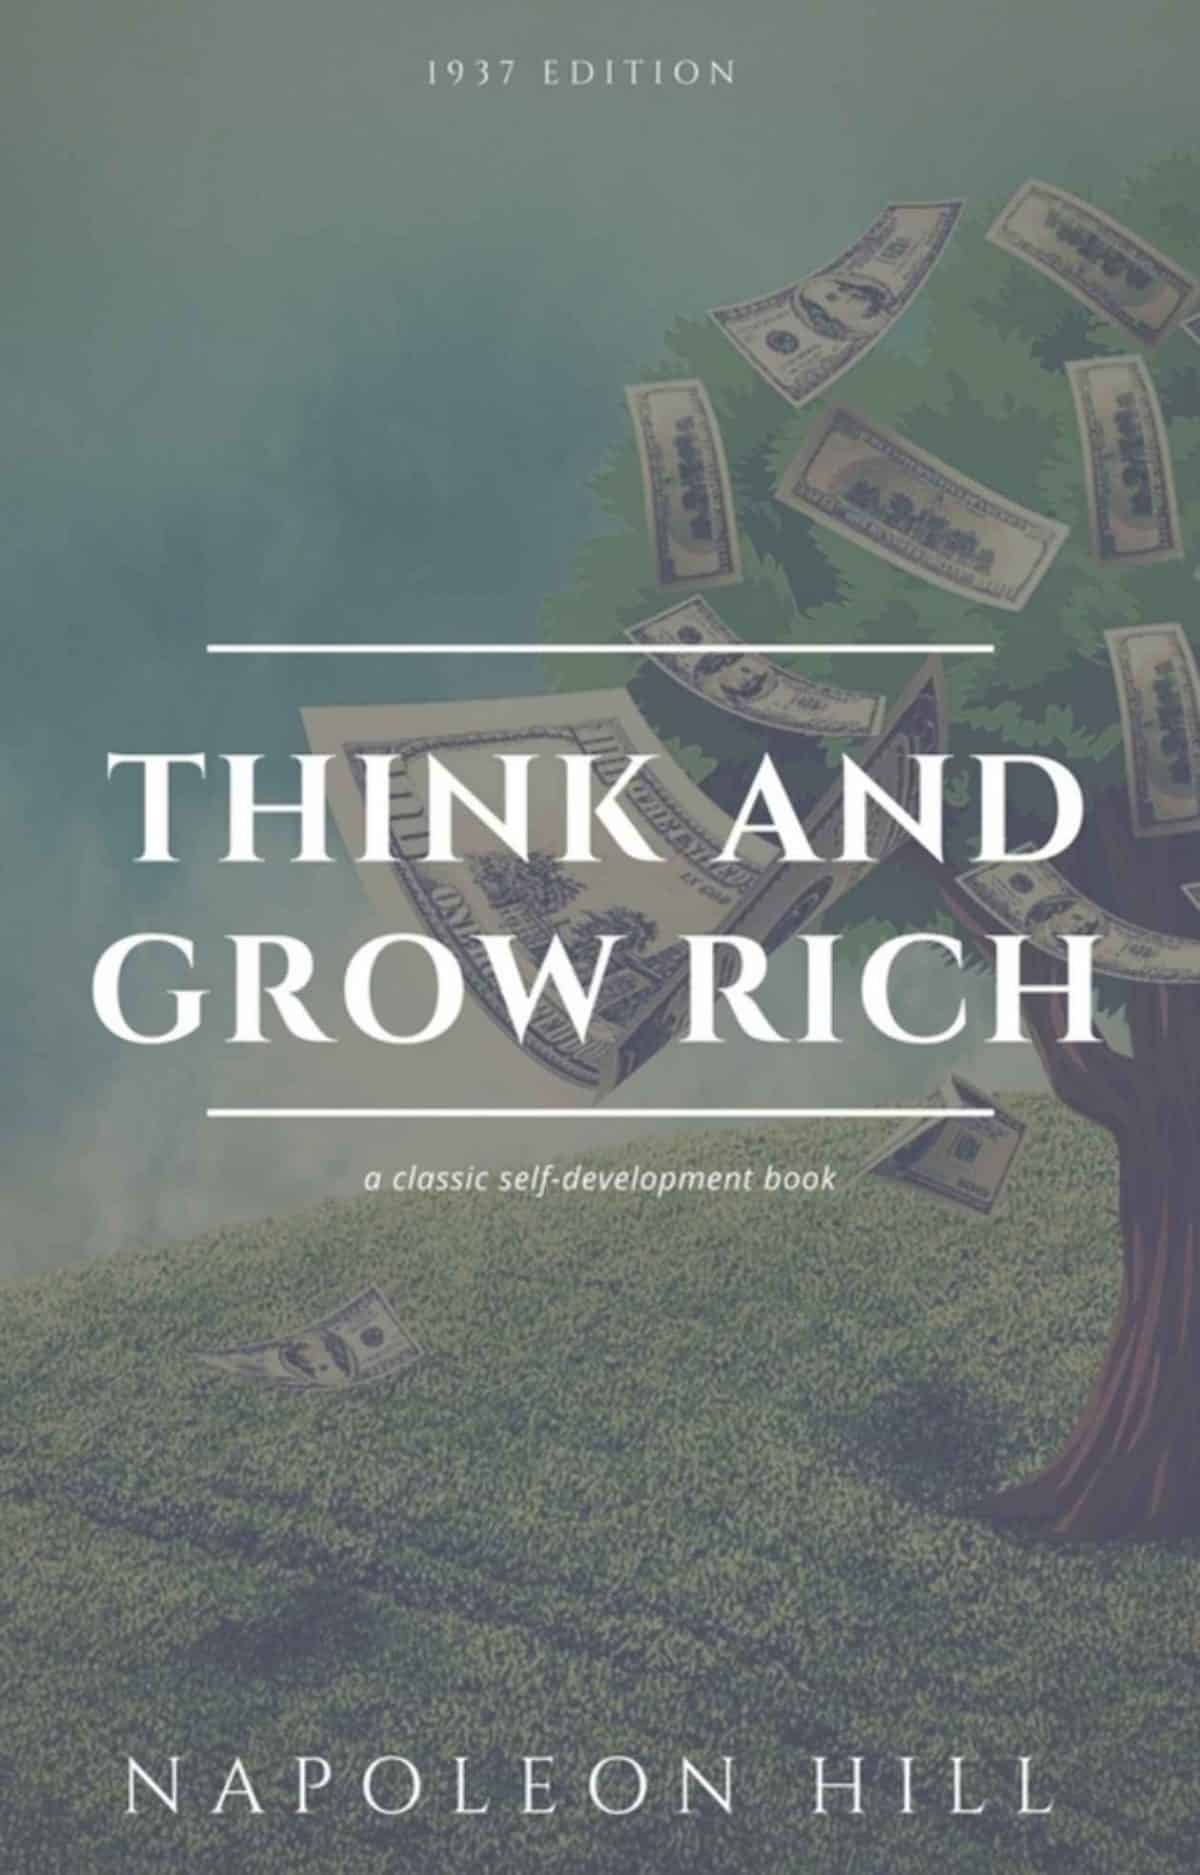 download the new for windows Think and Grow Rich